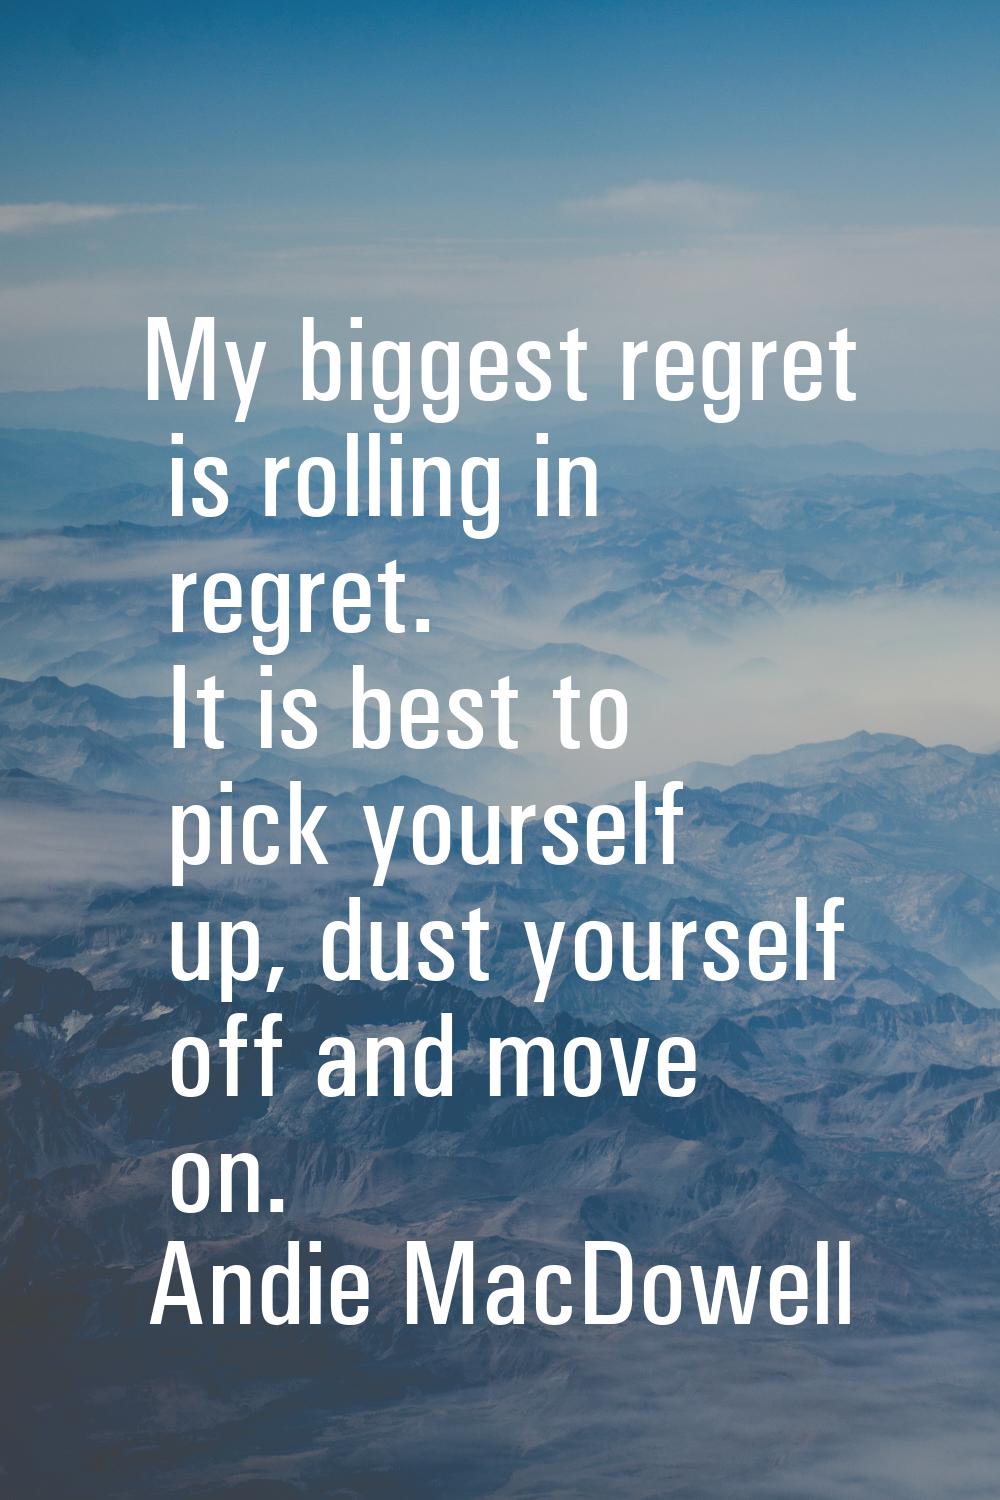 My biggest regret is rolling in regret. It is best to pick yourself up, dust yourself off and move 